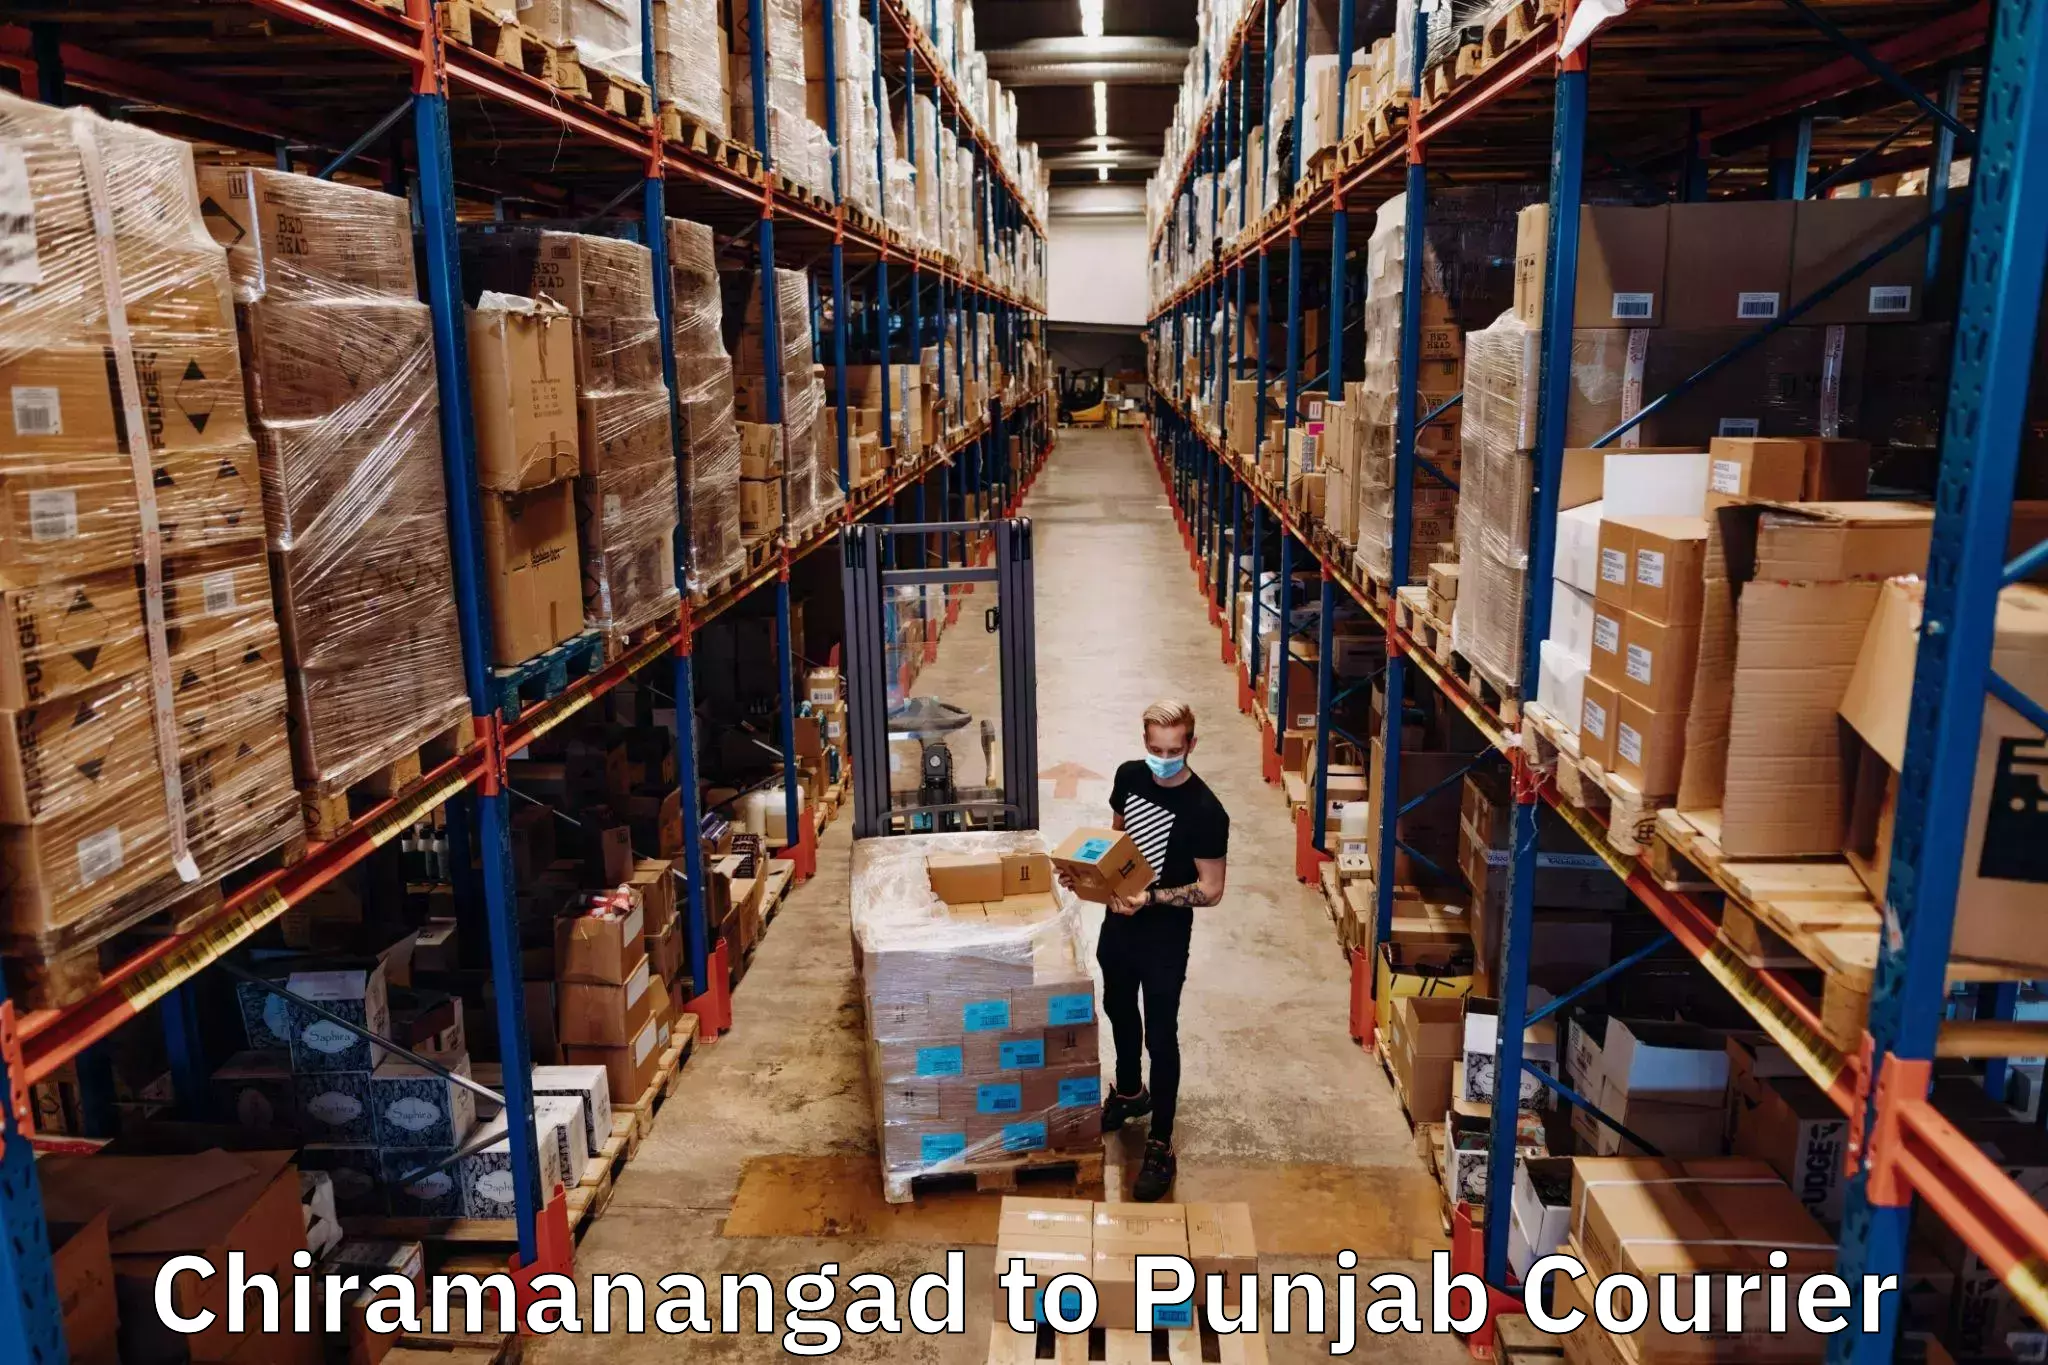 Sustainable courier practices Chiramanangad to Firozpur